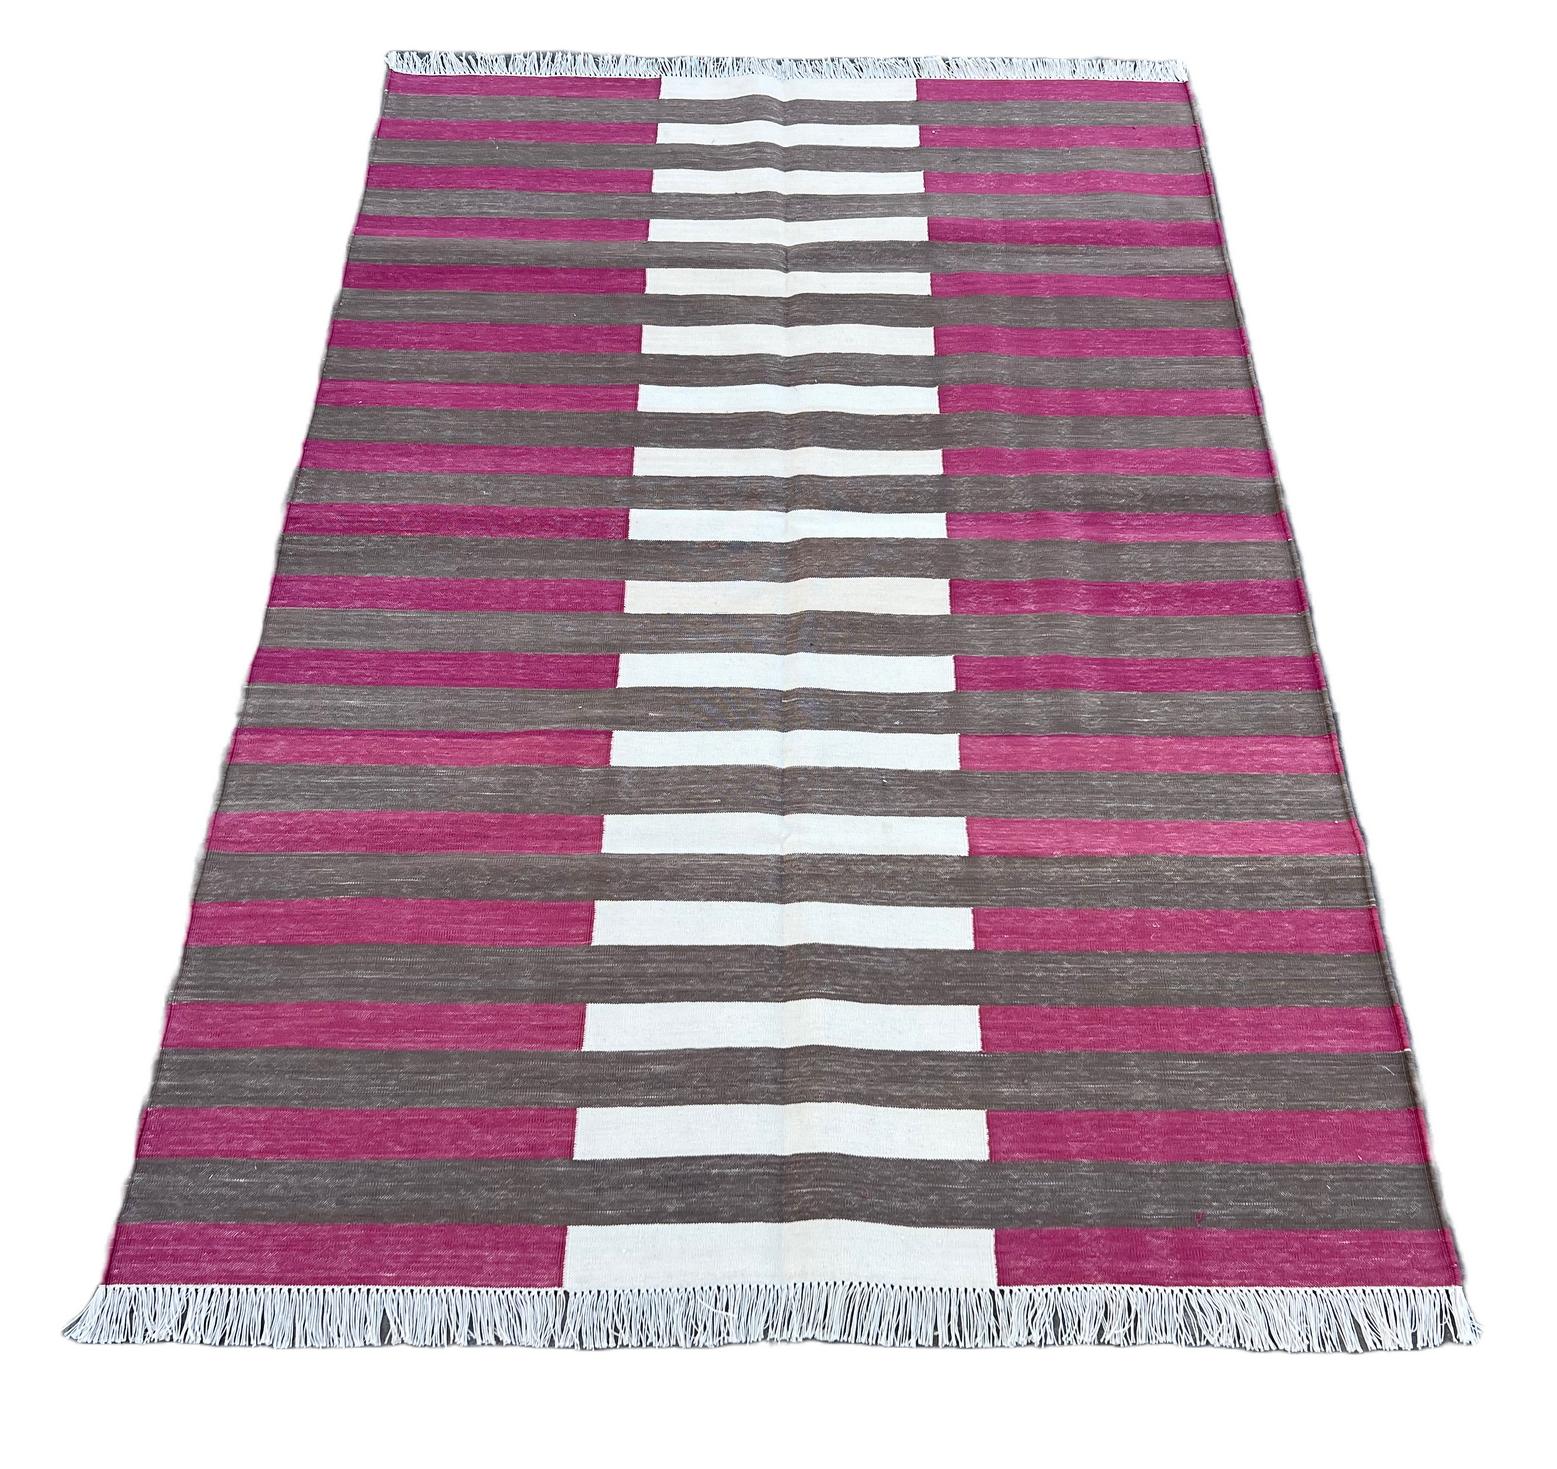 Contemporary Handmade Cotton Area Flat Weave Rug, 4x6 Brown And Pink Striped Indian Dhurrie For Sale